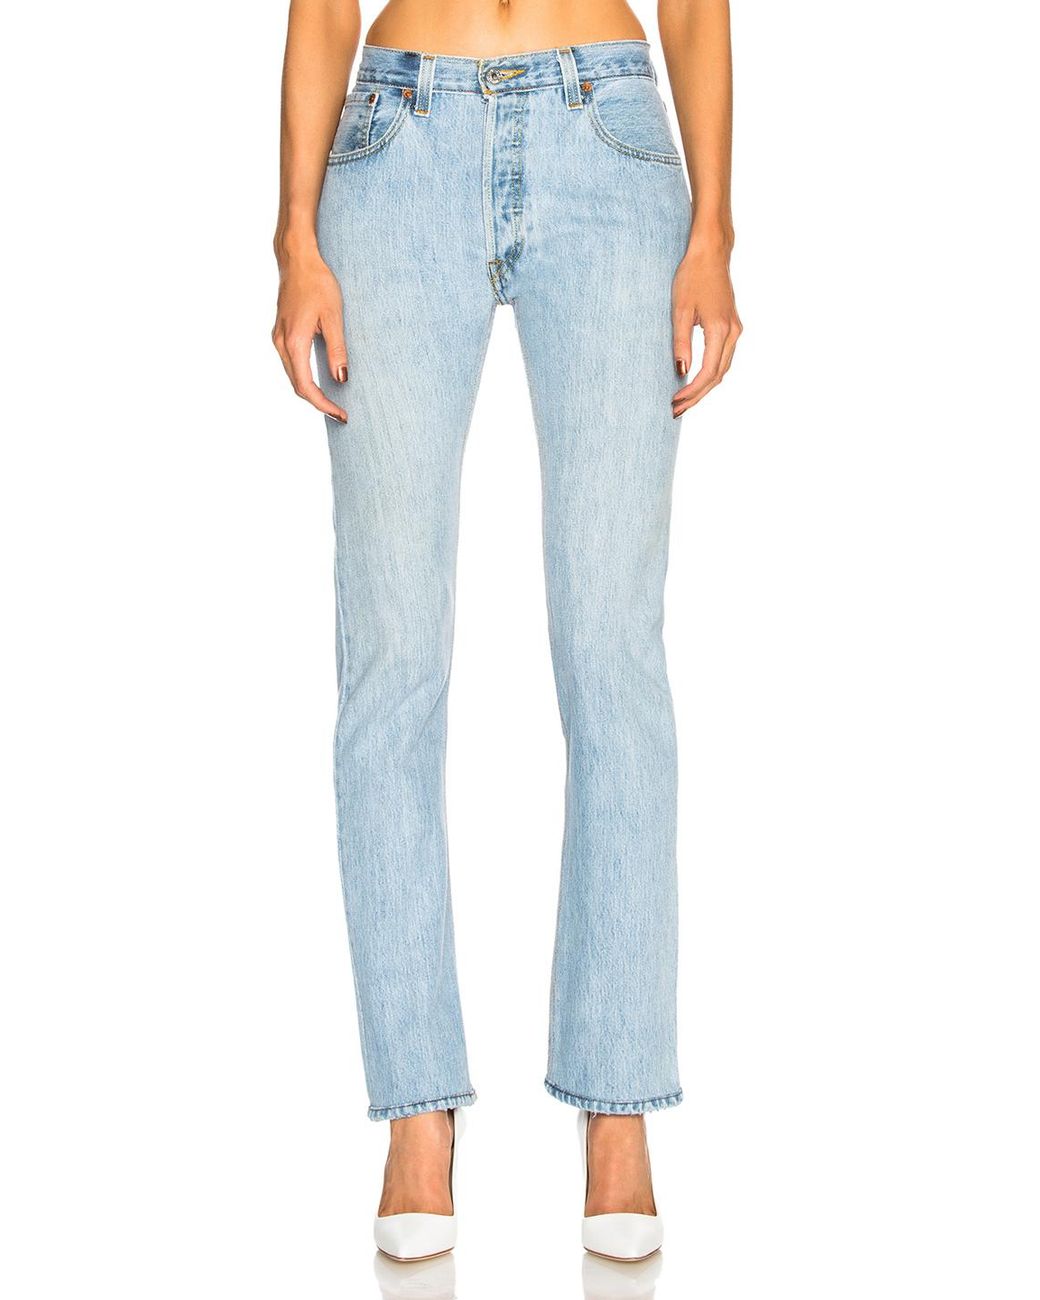 RE/DONE Cotton Levi's Cindy Crawford The Crawford High Rise in Indigo ...